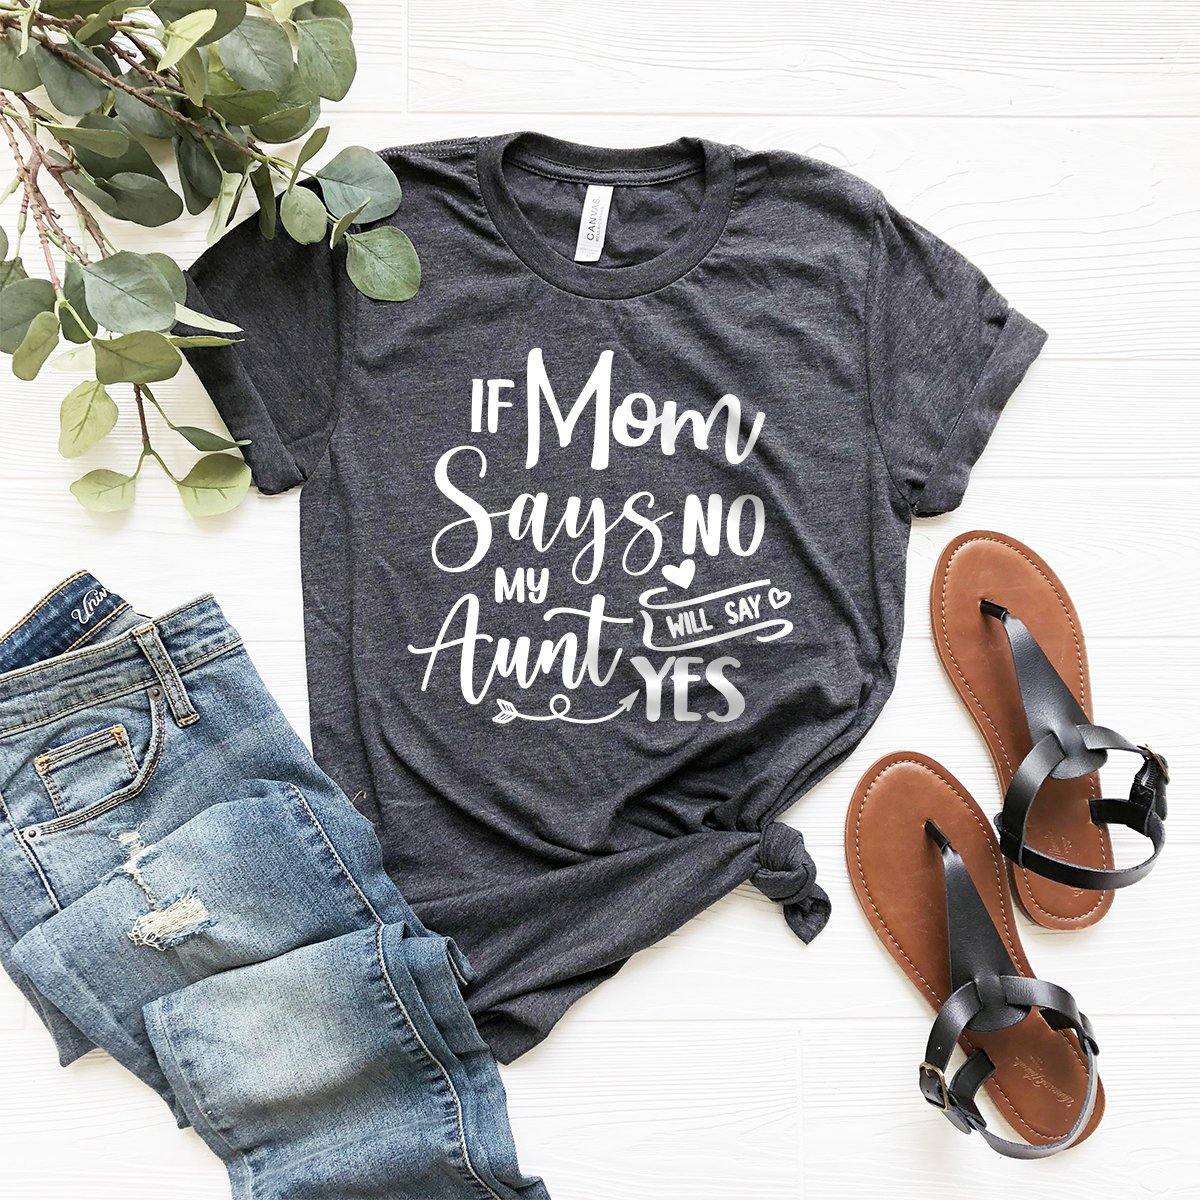 Funny Aunt Shirts, Gift For Aunt, Aunt T-shirt, Best Aunt Ever Tee, Auntie Tee, Aunt Gift, If Mom Says No My Aunt Will Say Yes Shirt - Fastdeliverytees.com